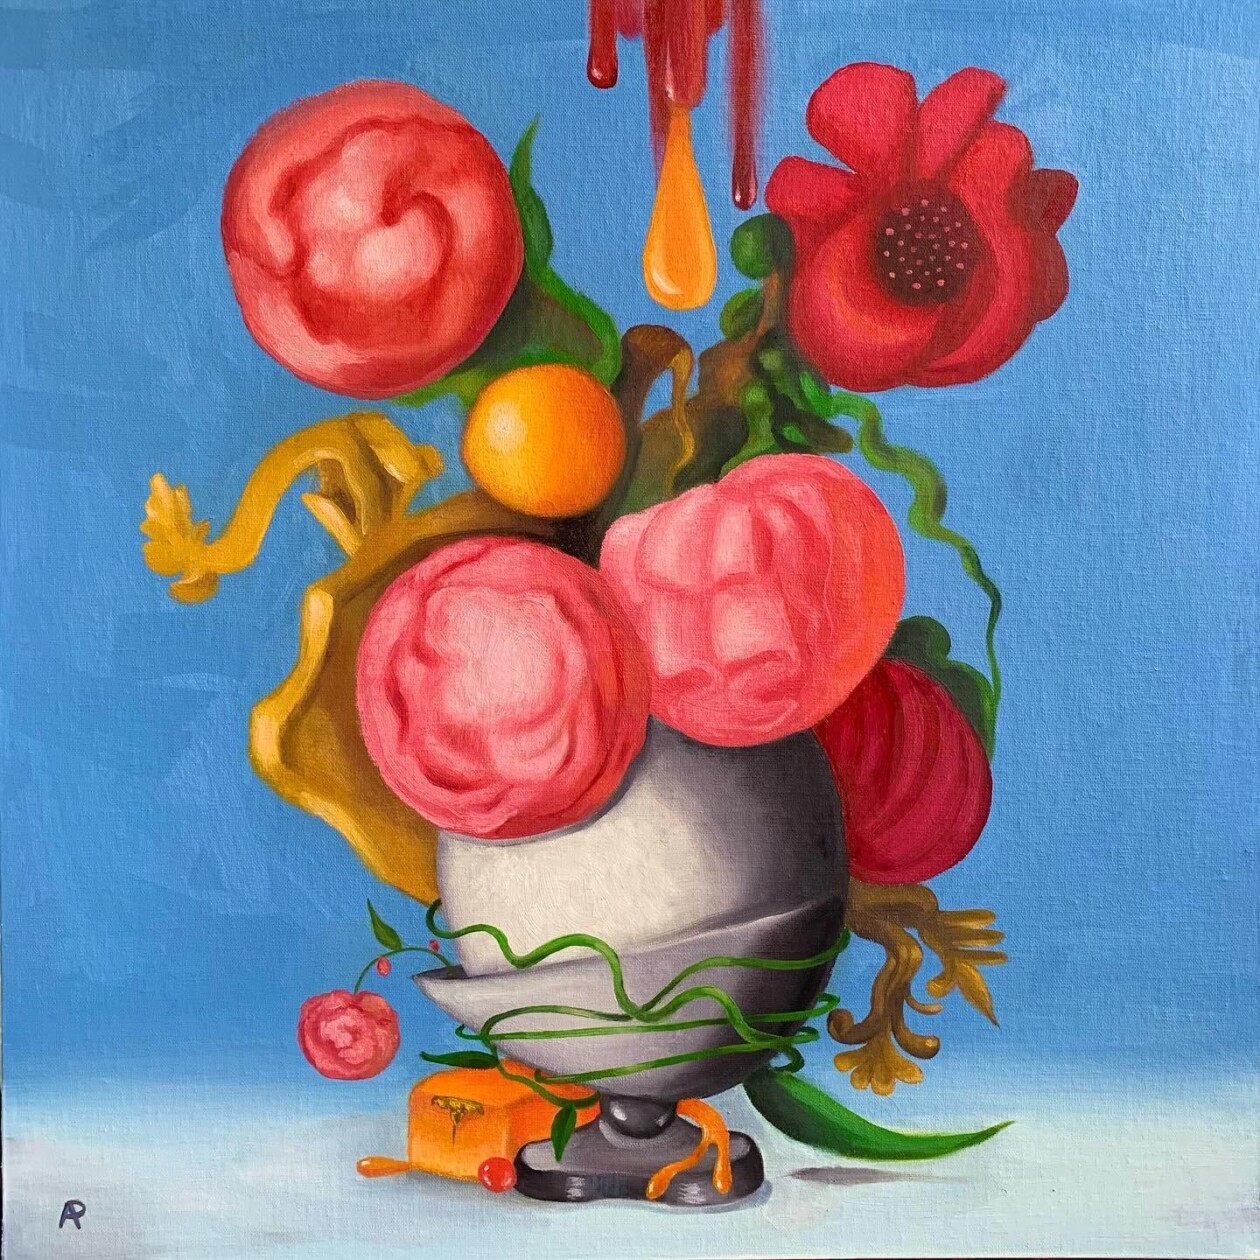 Lush Surreal Still Life Paintings By American Artist Arabella Proffer (8)